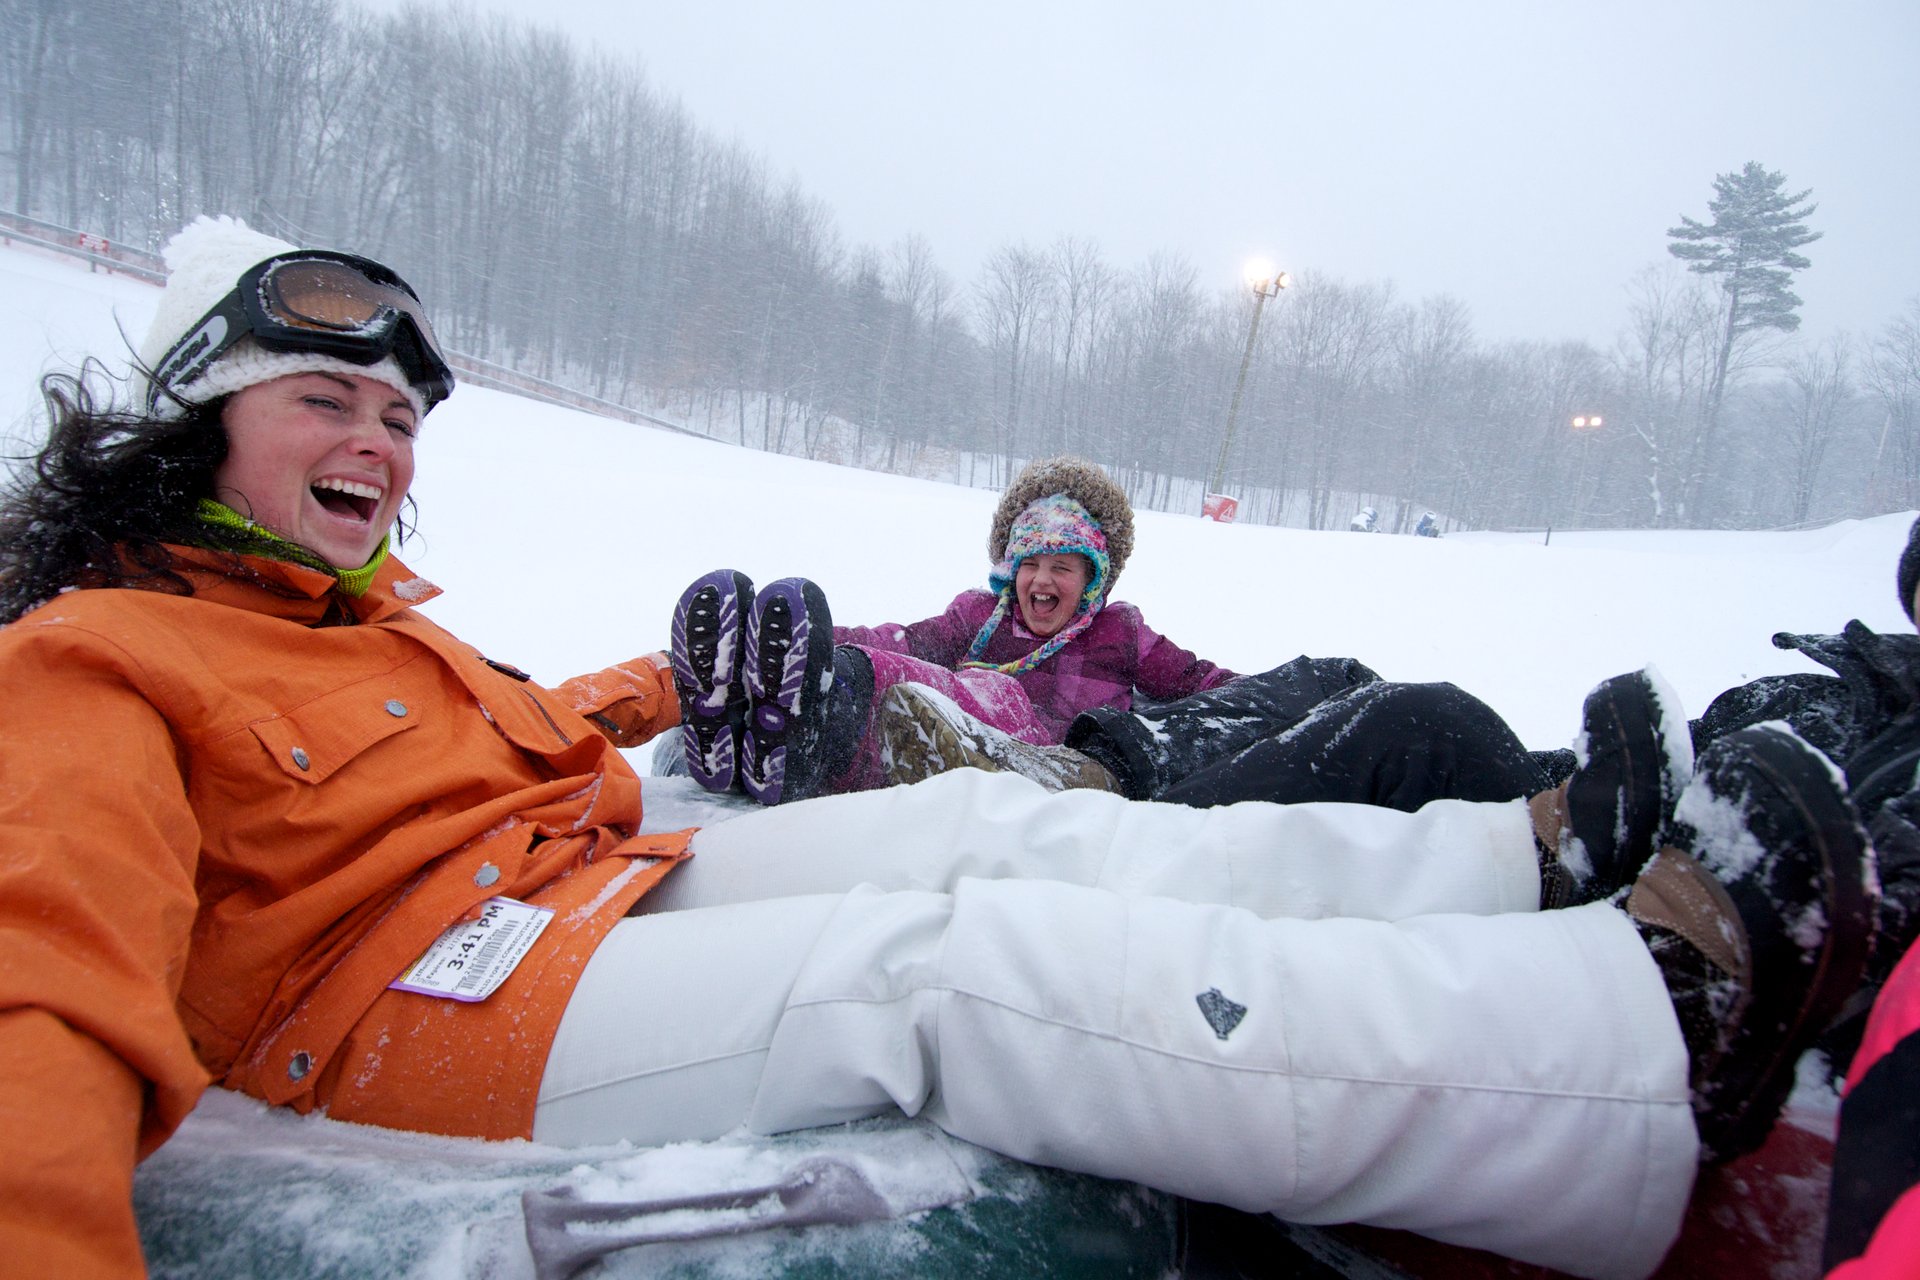 Horseshoe Resort snow tubing group with people laughing as they go down the hill